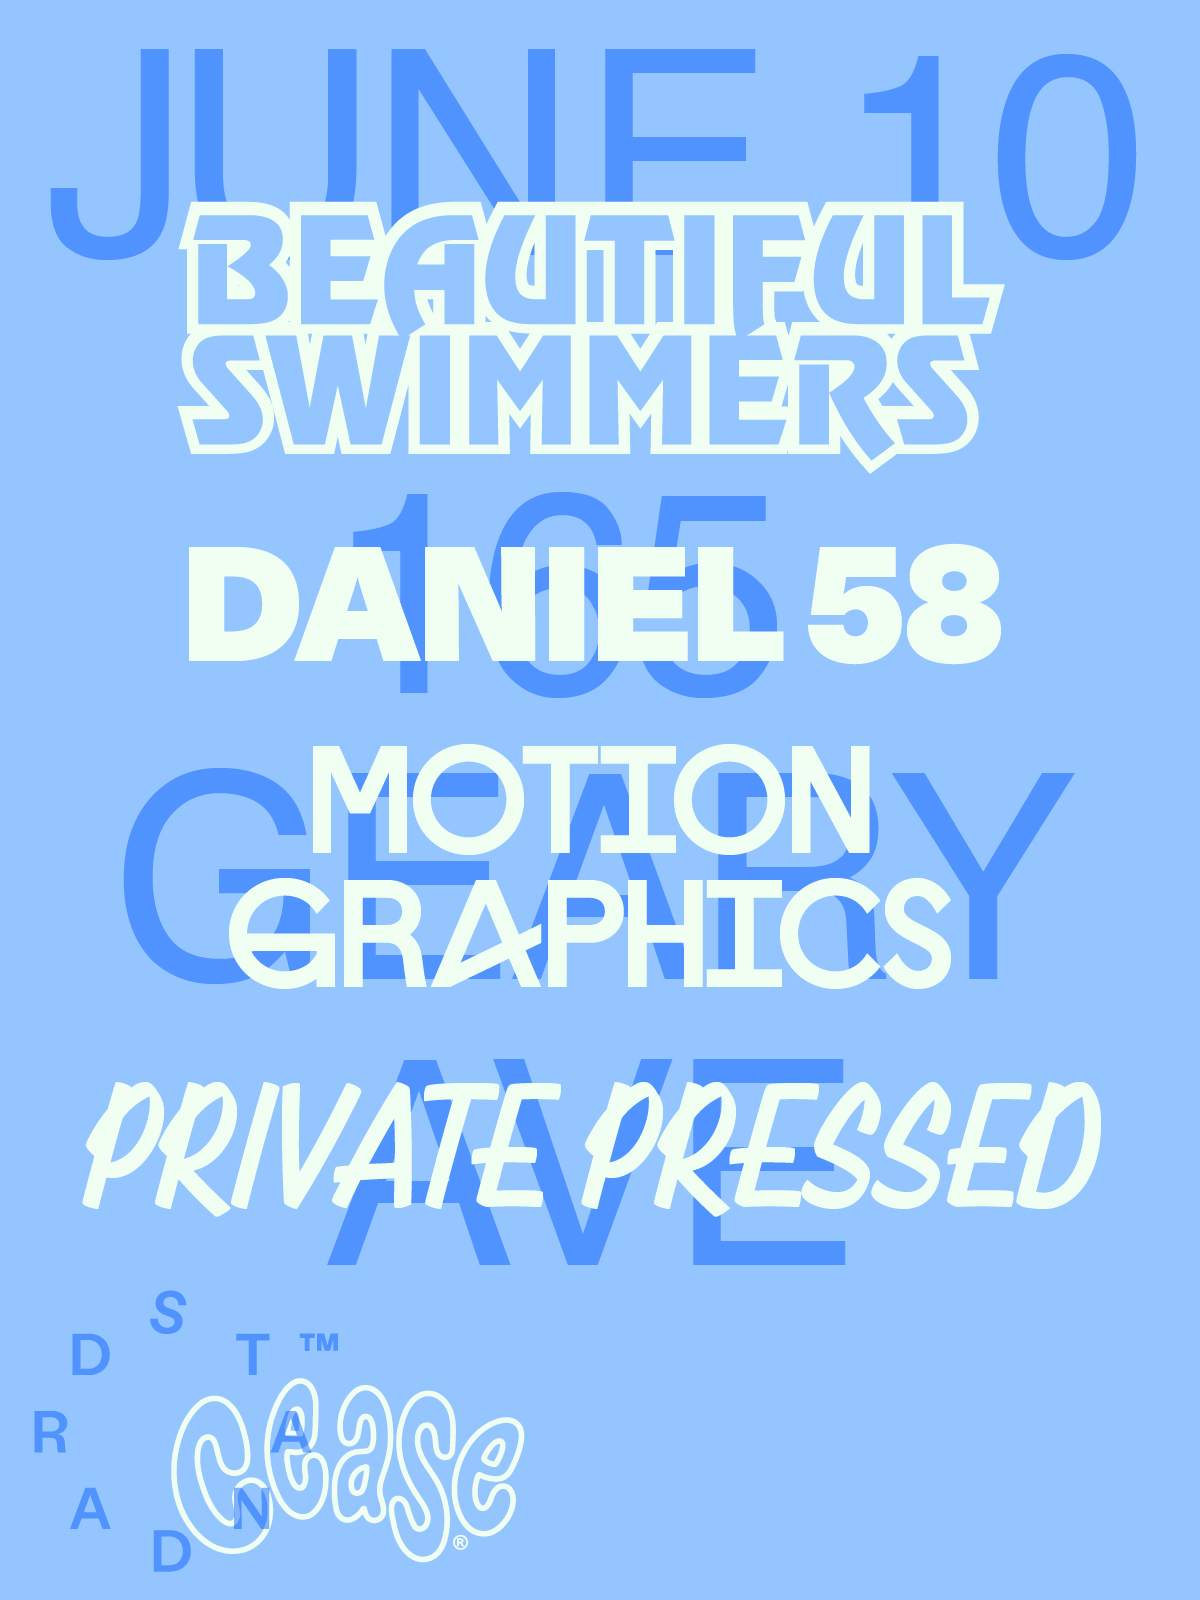 030: Beautiful Swimmers, Motion Graphics, Daniel 58 and Private Pressed - フライヤー表